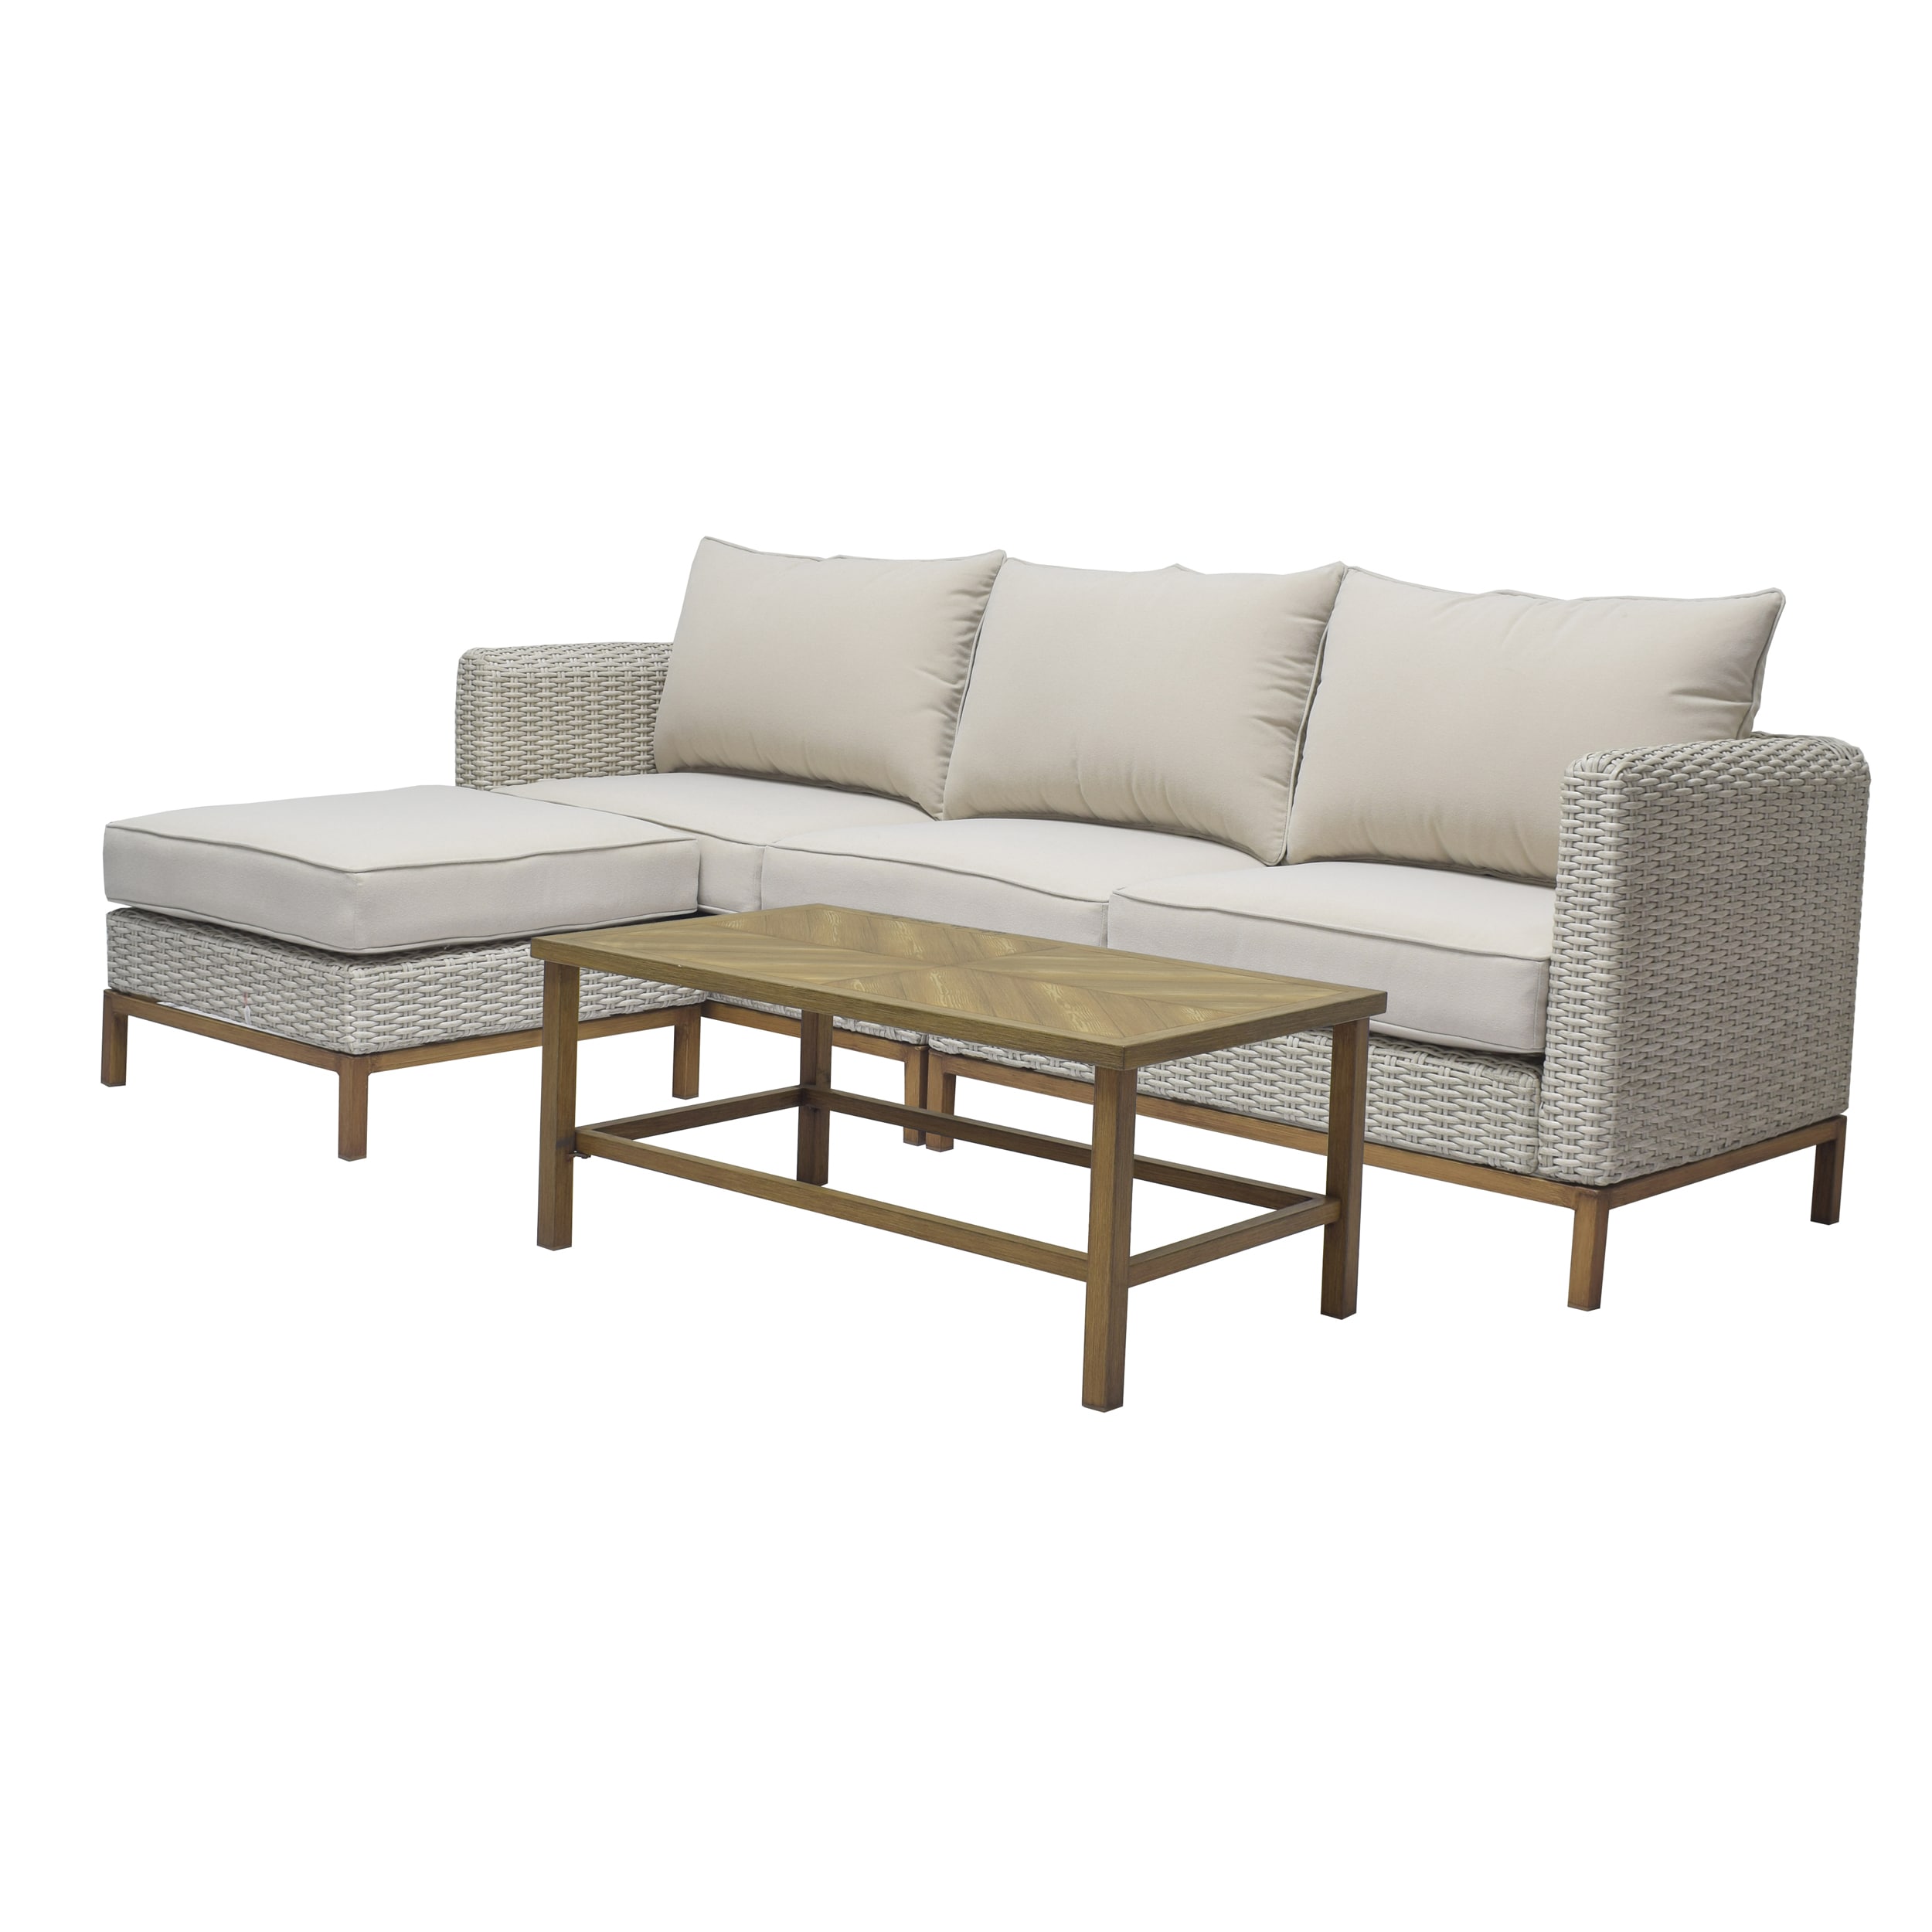 Origin 21 Veda in with Patio Springs Patio at Sets Off-white Wicker the Set Conversation Conversation Cushions department 4-Piece